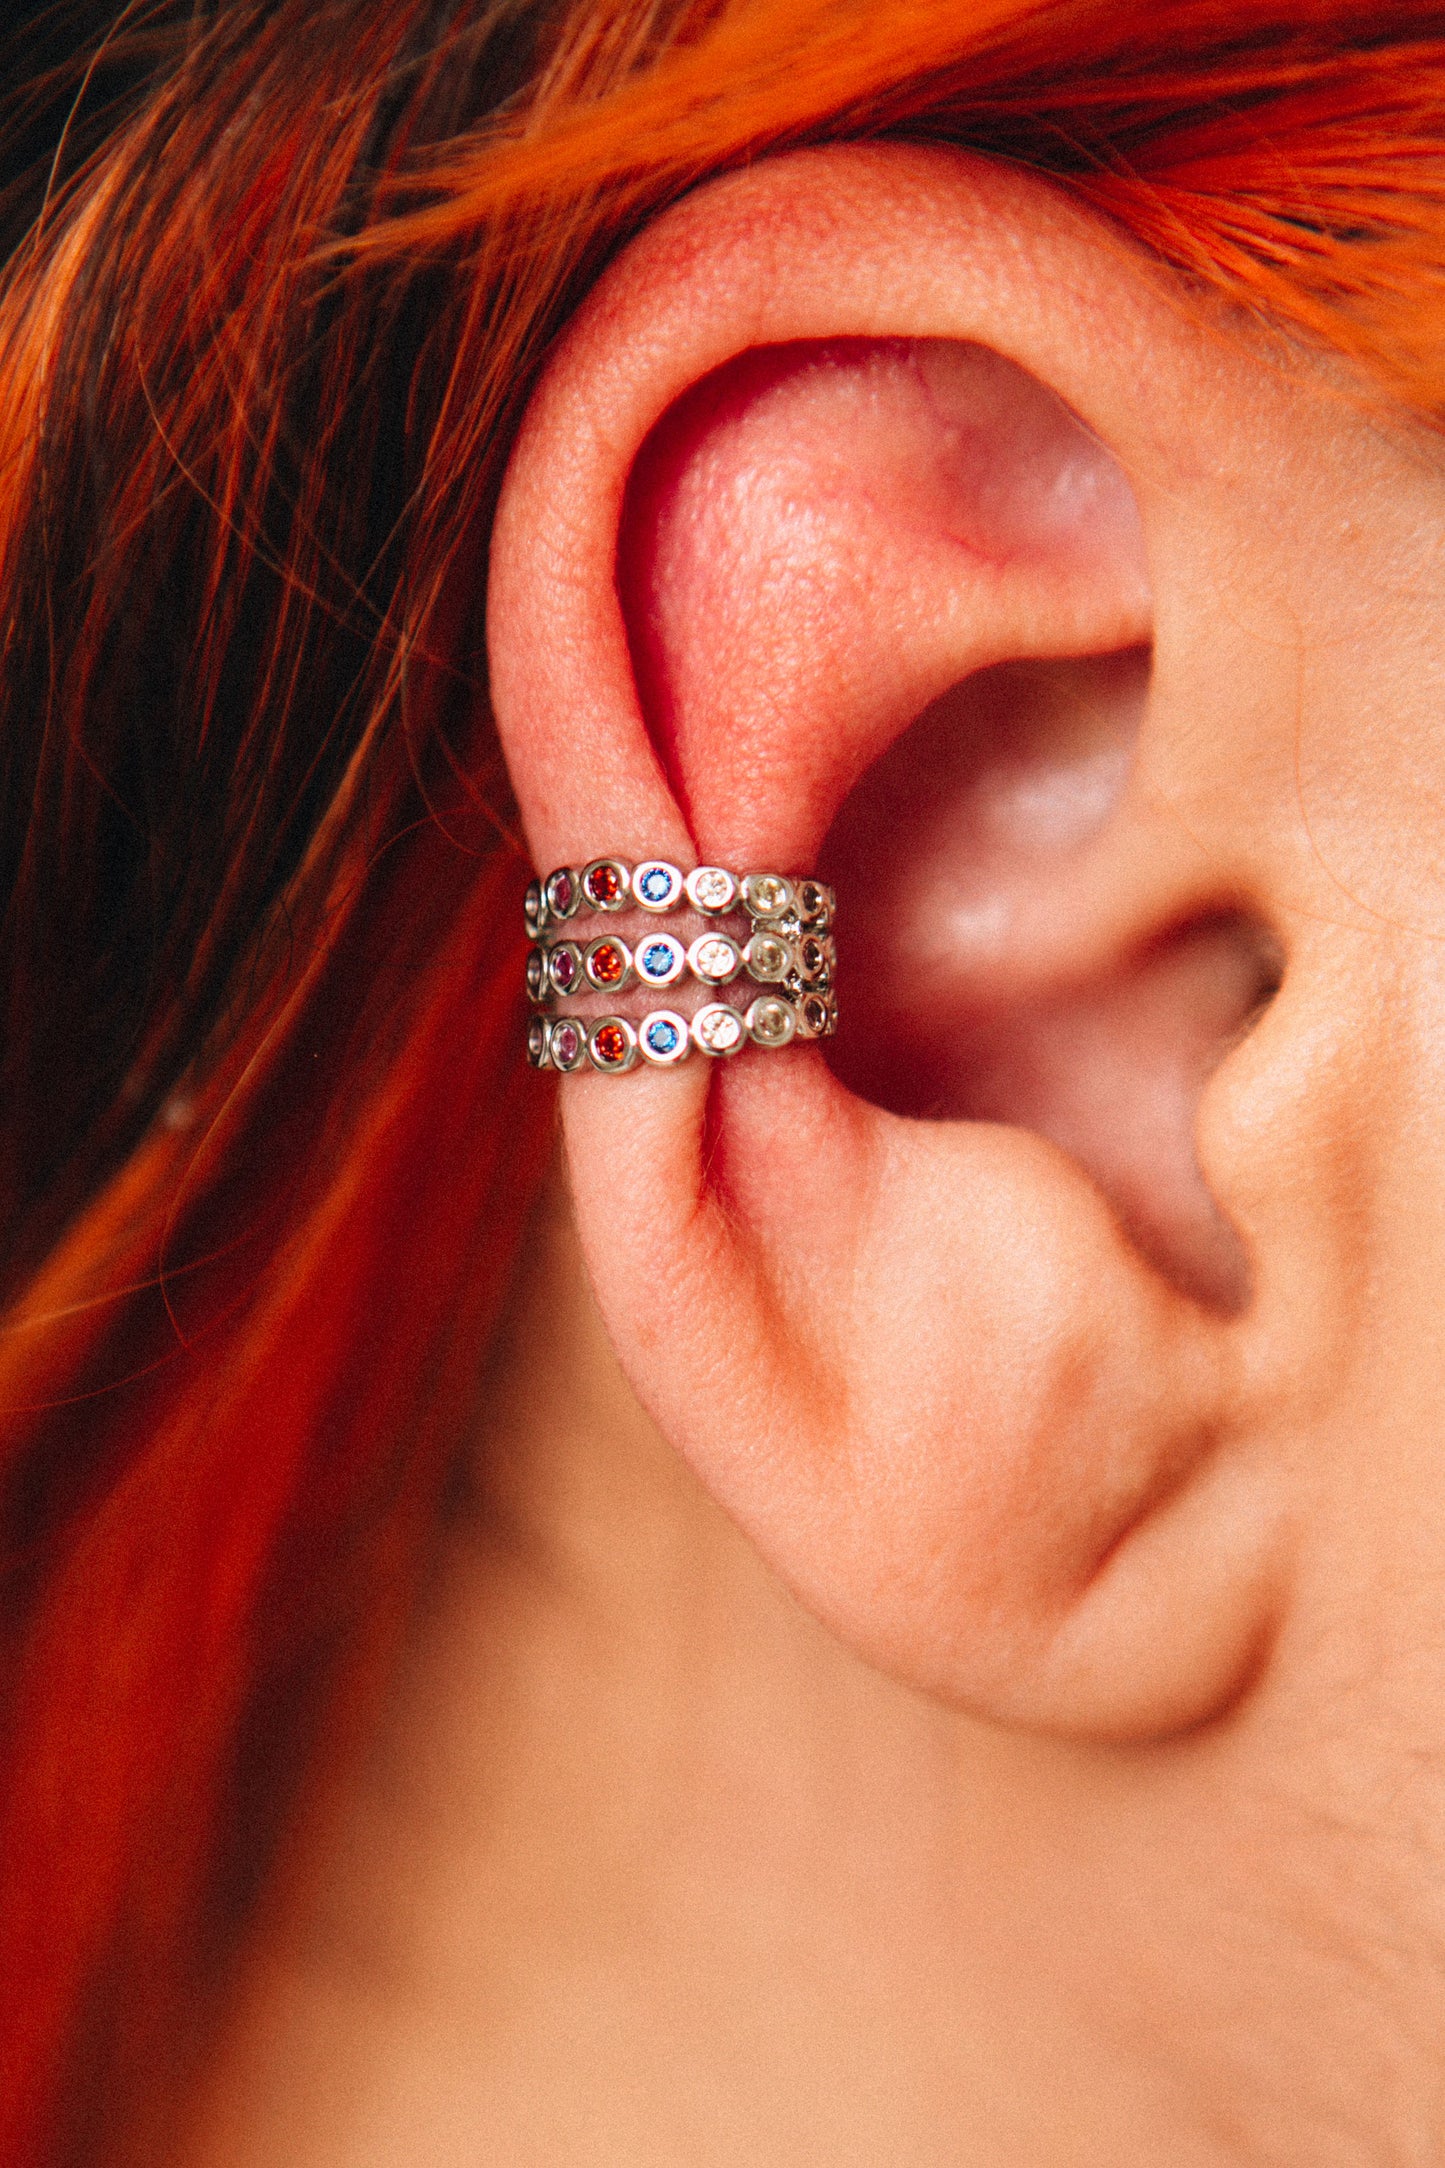 Ivy Exclusive - Over the Rainbow Triple Stack Ear Cuff